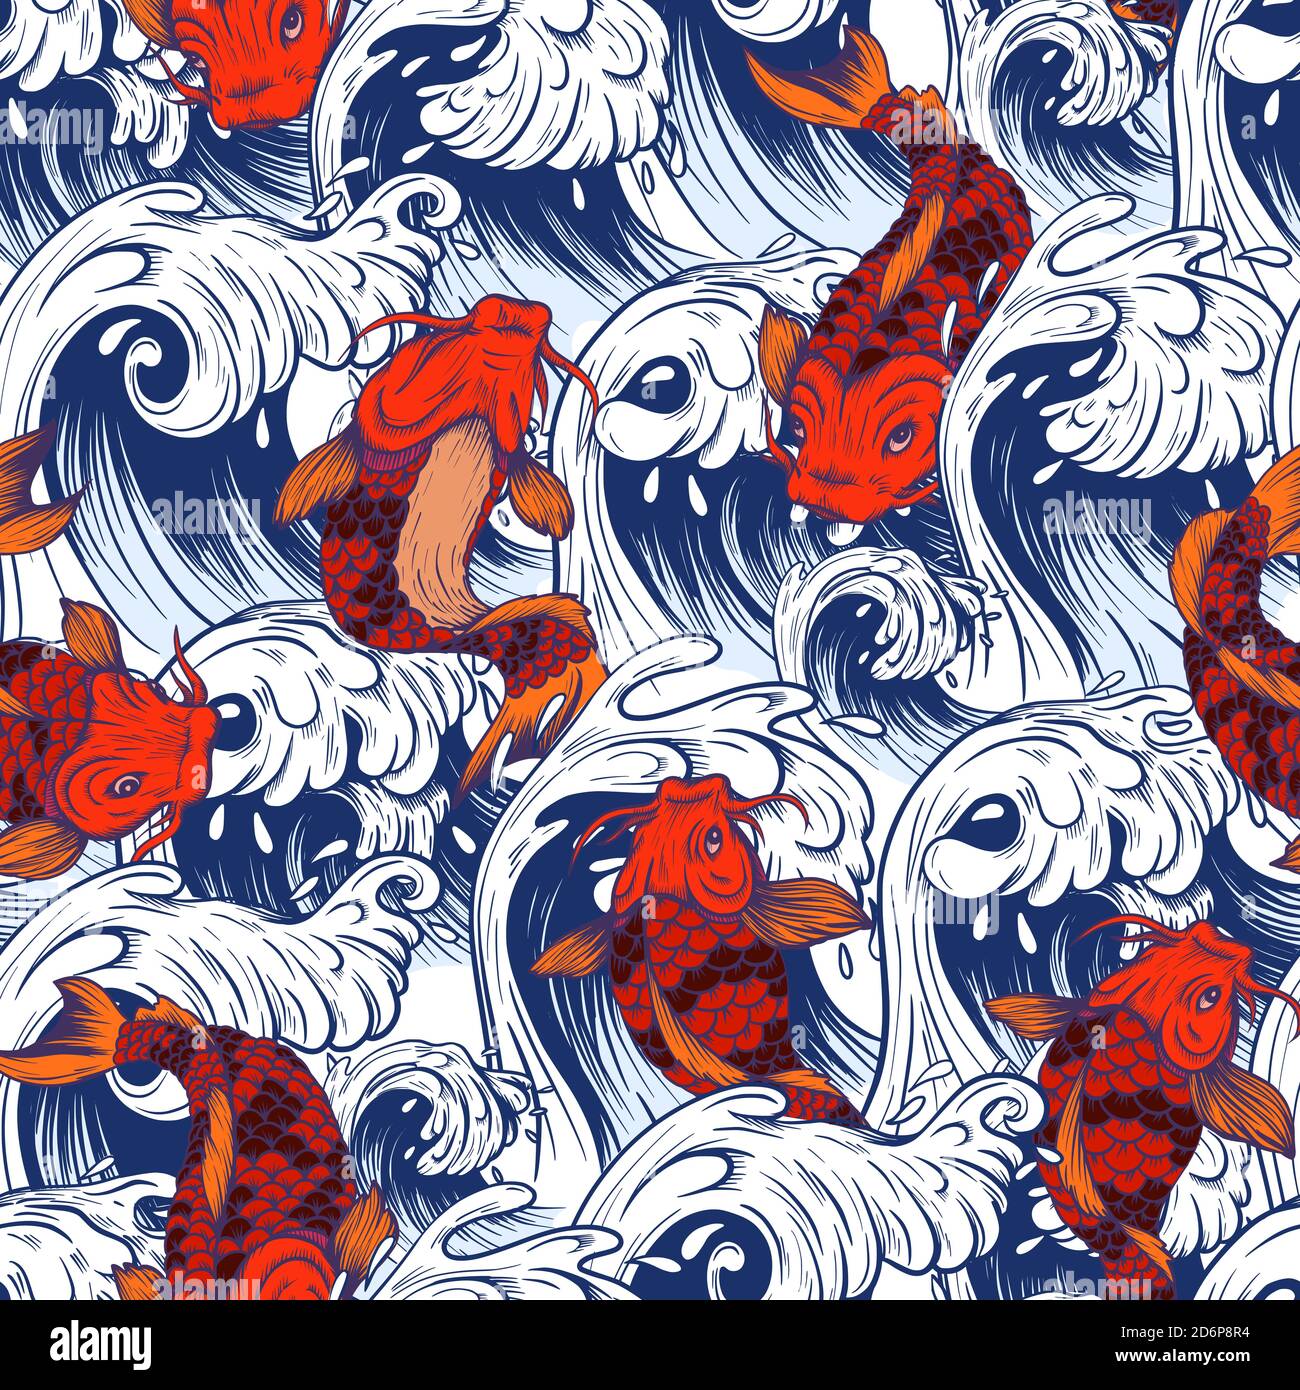 Seamless pattern with fish koi. Japanese vintage print Stock Vector